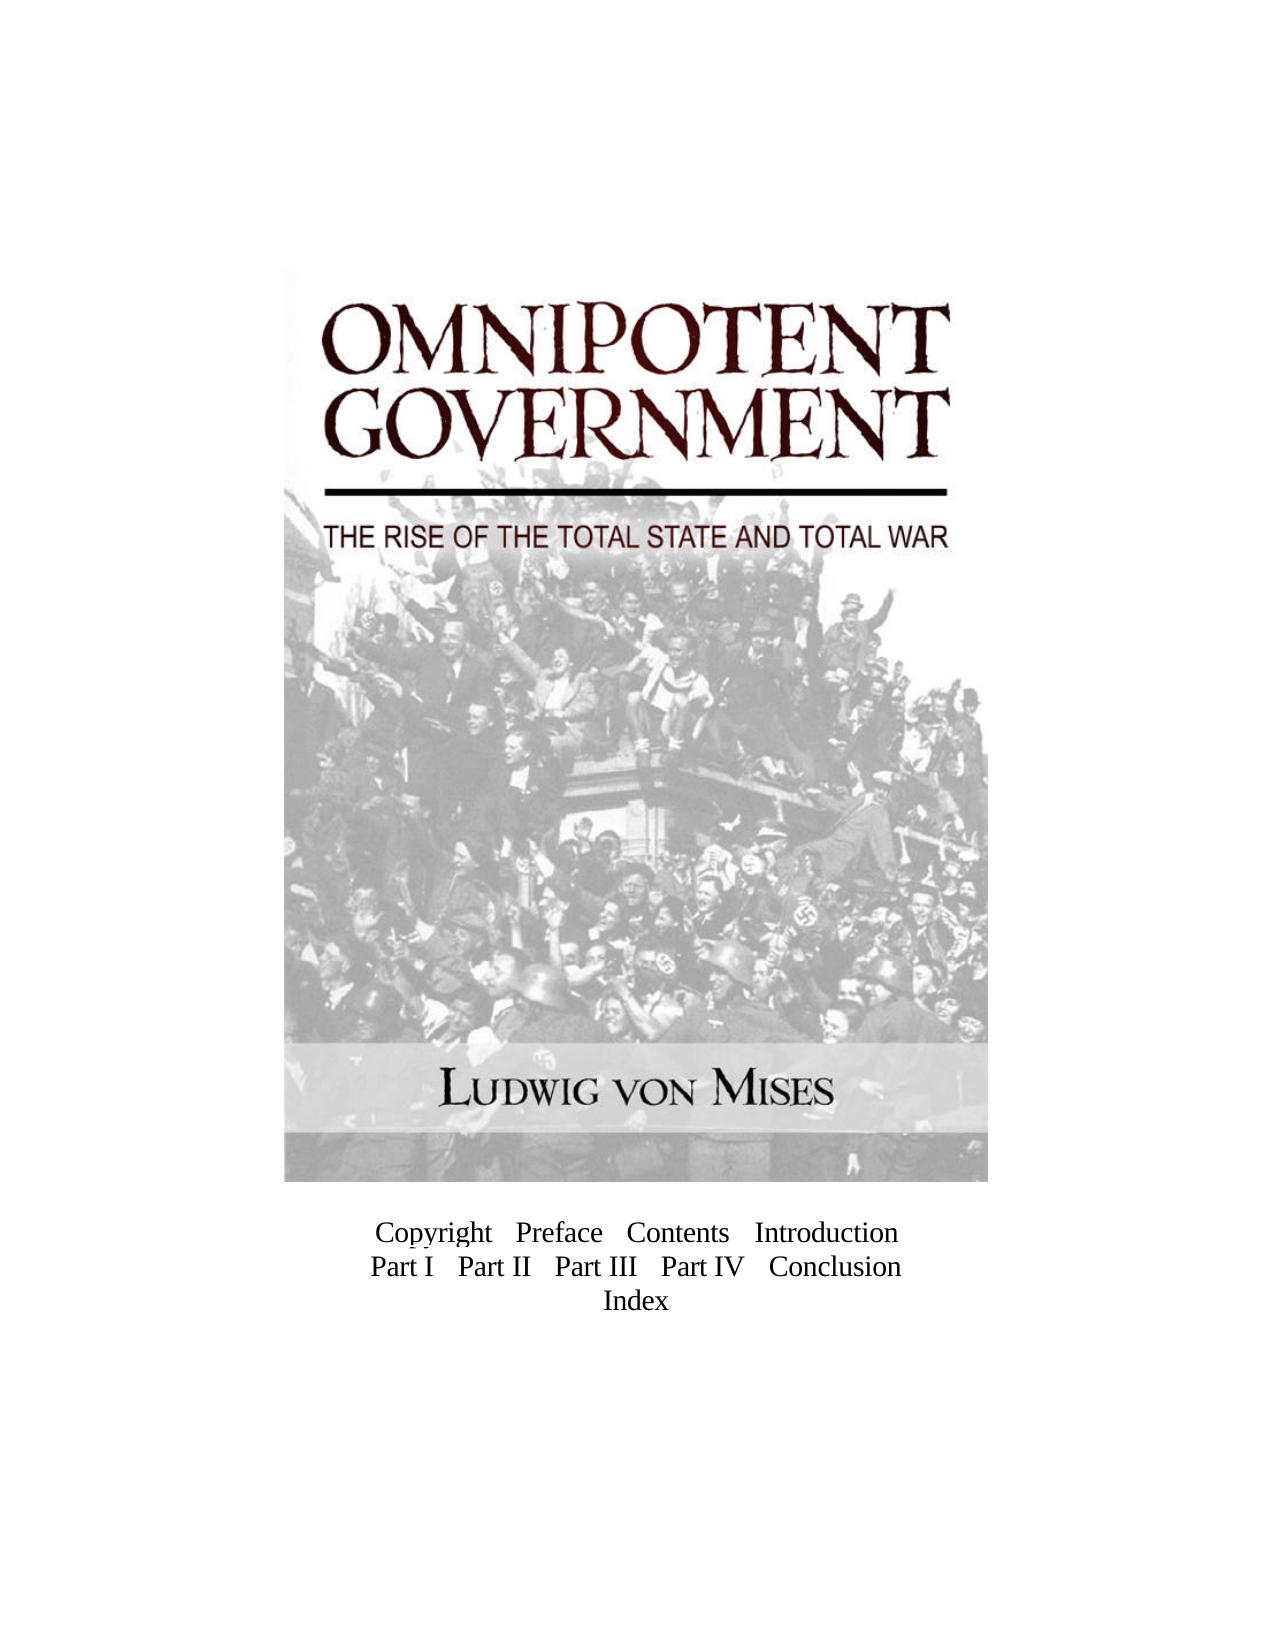 Omnipotent Government: The Rise of the Total State and Total War by Ludwig von Mises